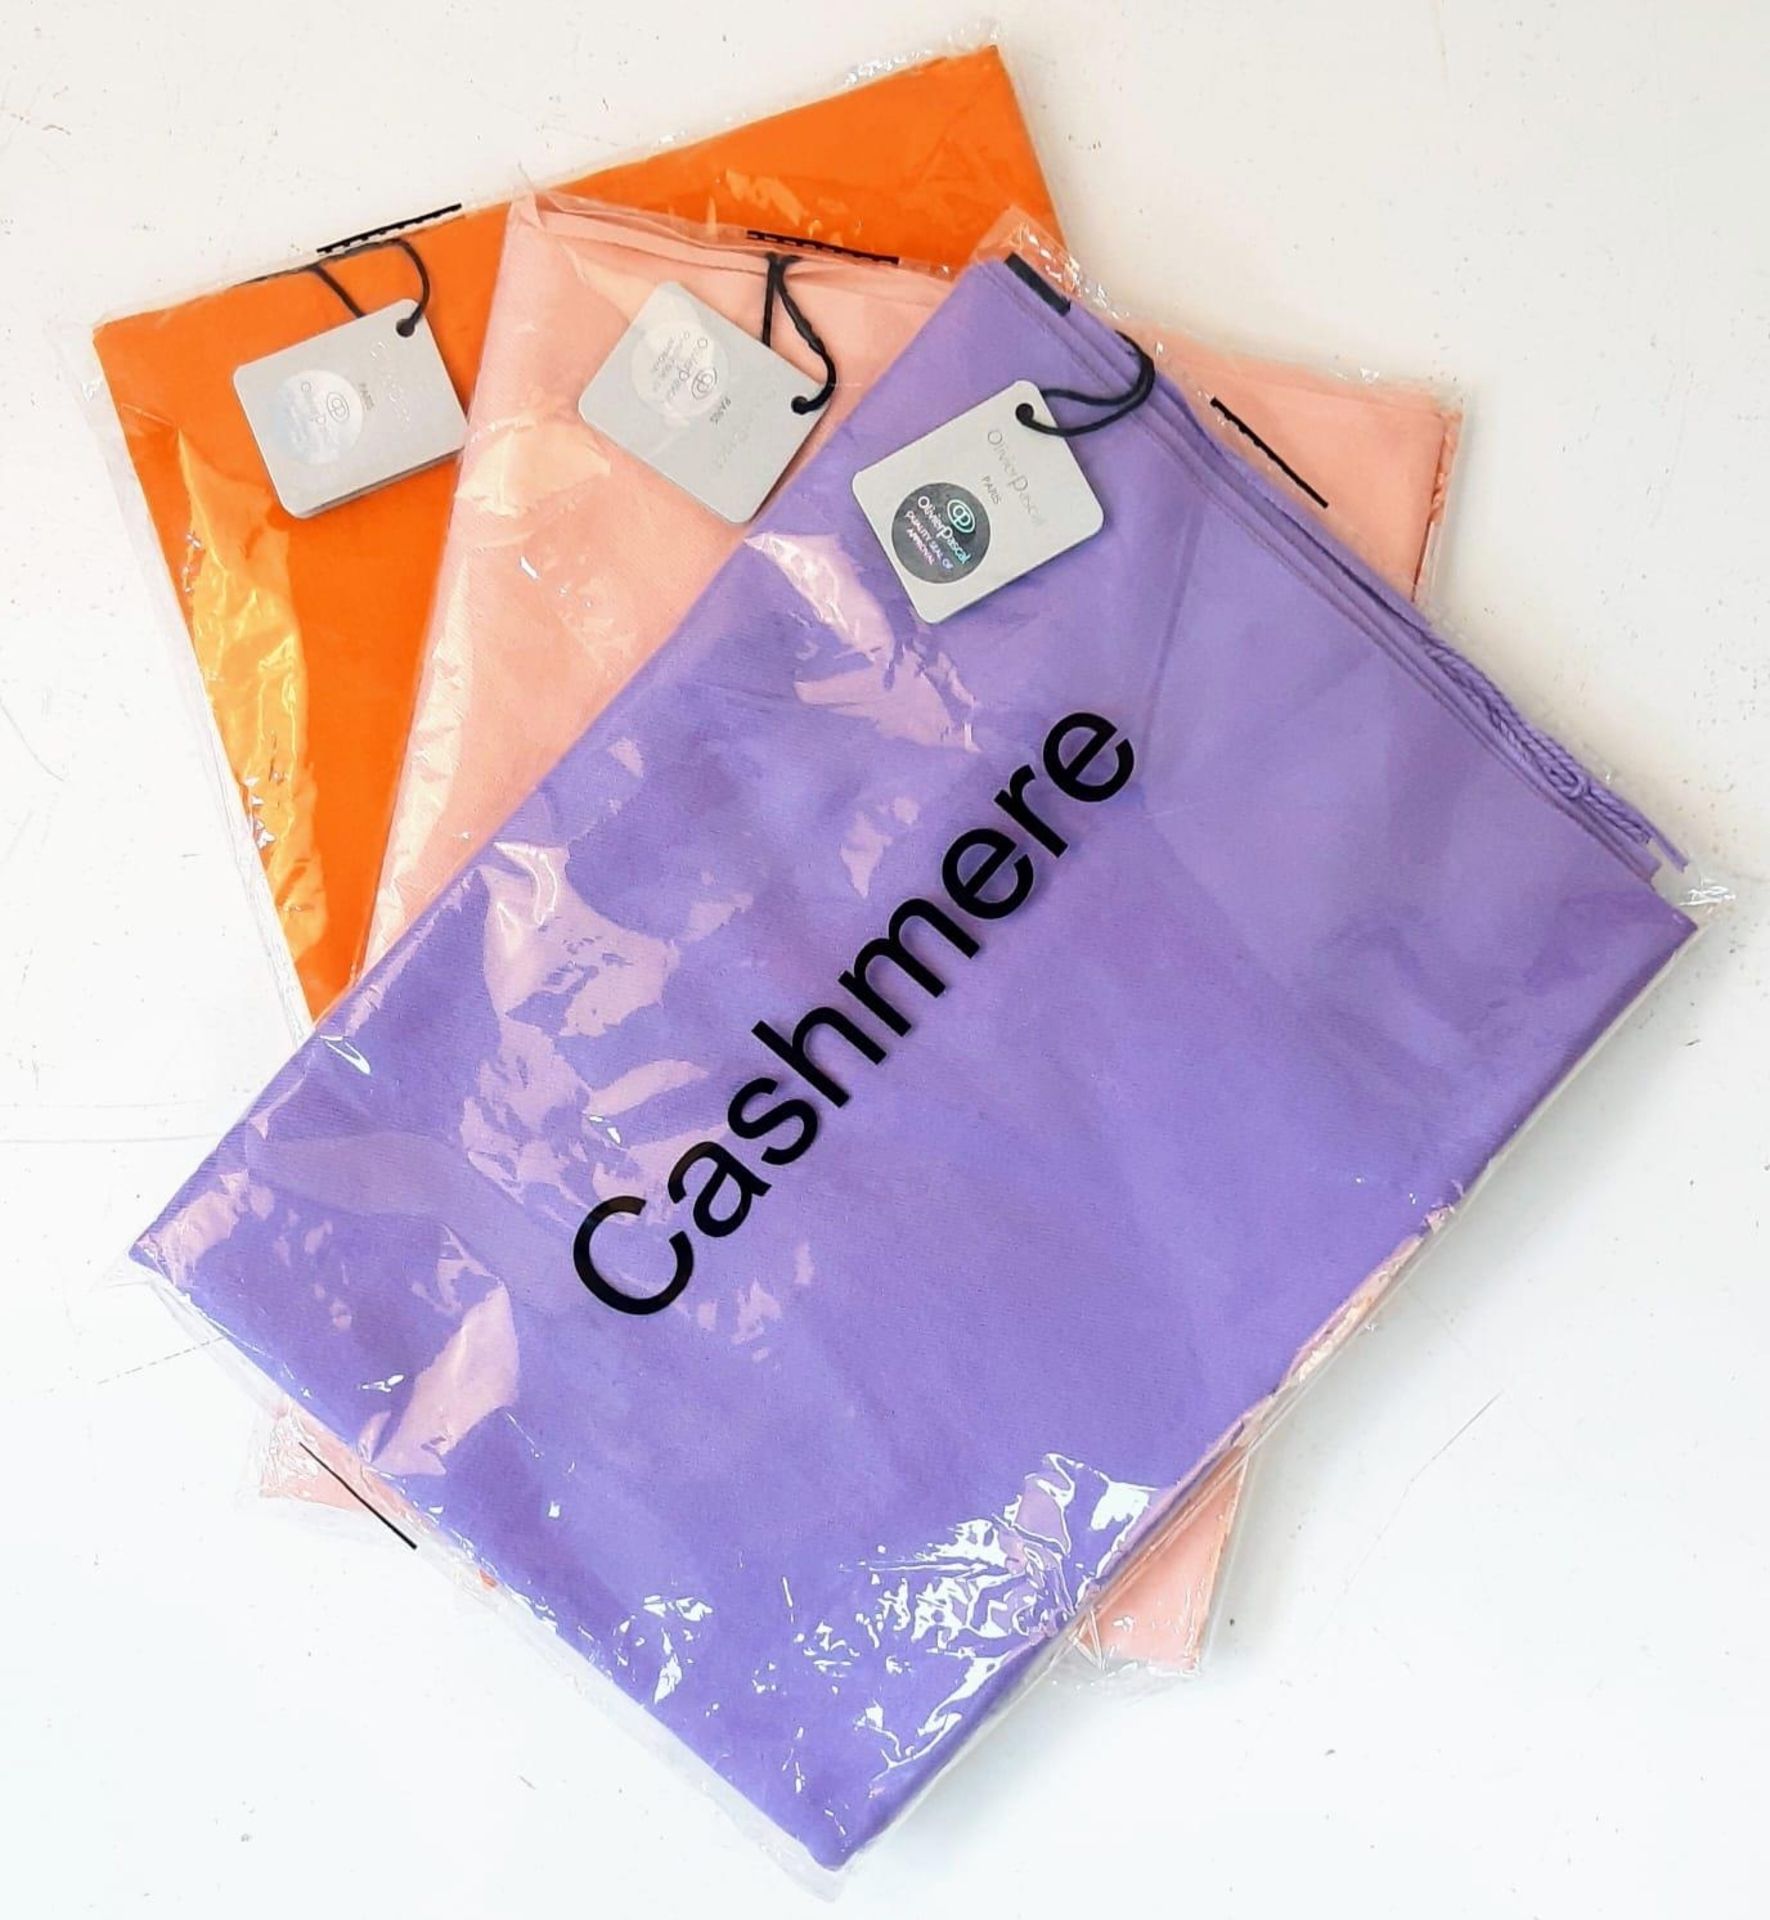 Three Cashmere scarfs by OLIVER PASCAL - PARIS. New/unused condition in original wraps with tags.